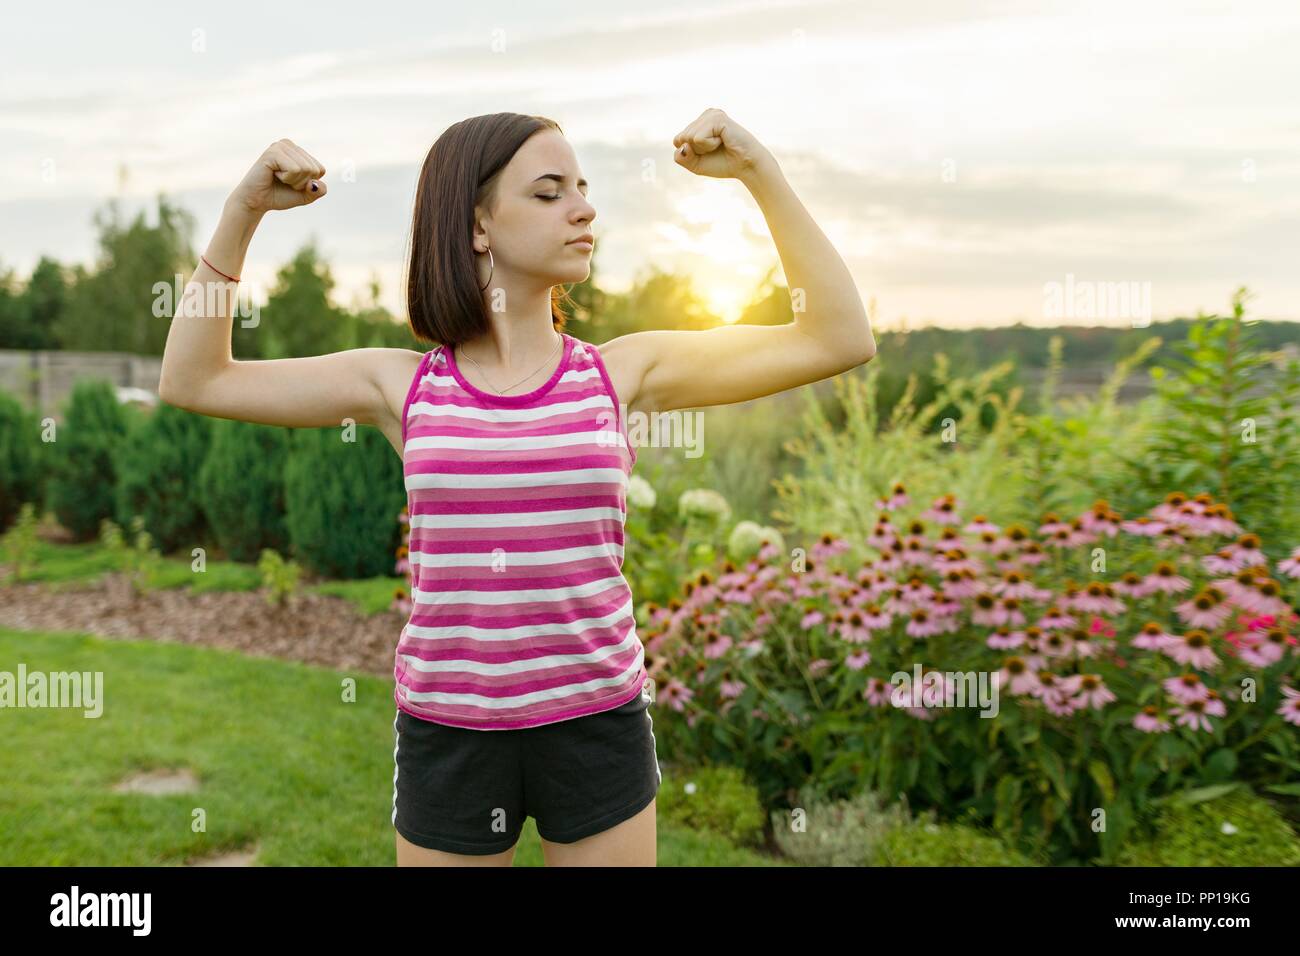 People, power, stamina, strength, health, sport, fitness concept. Outdoor portrait smiling teenage girl flexing her muscles, background green lawn sun Stock Photo